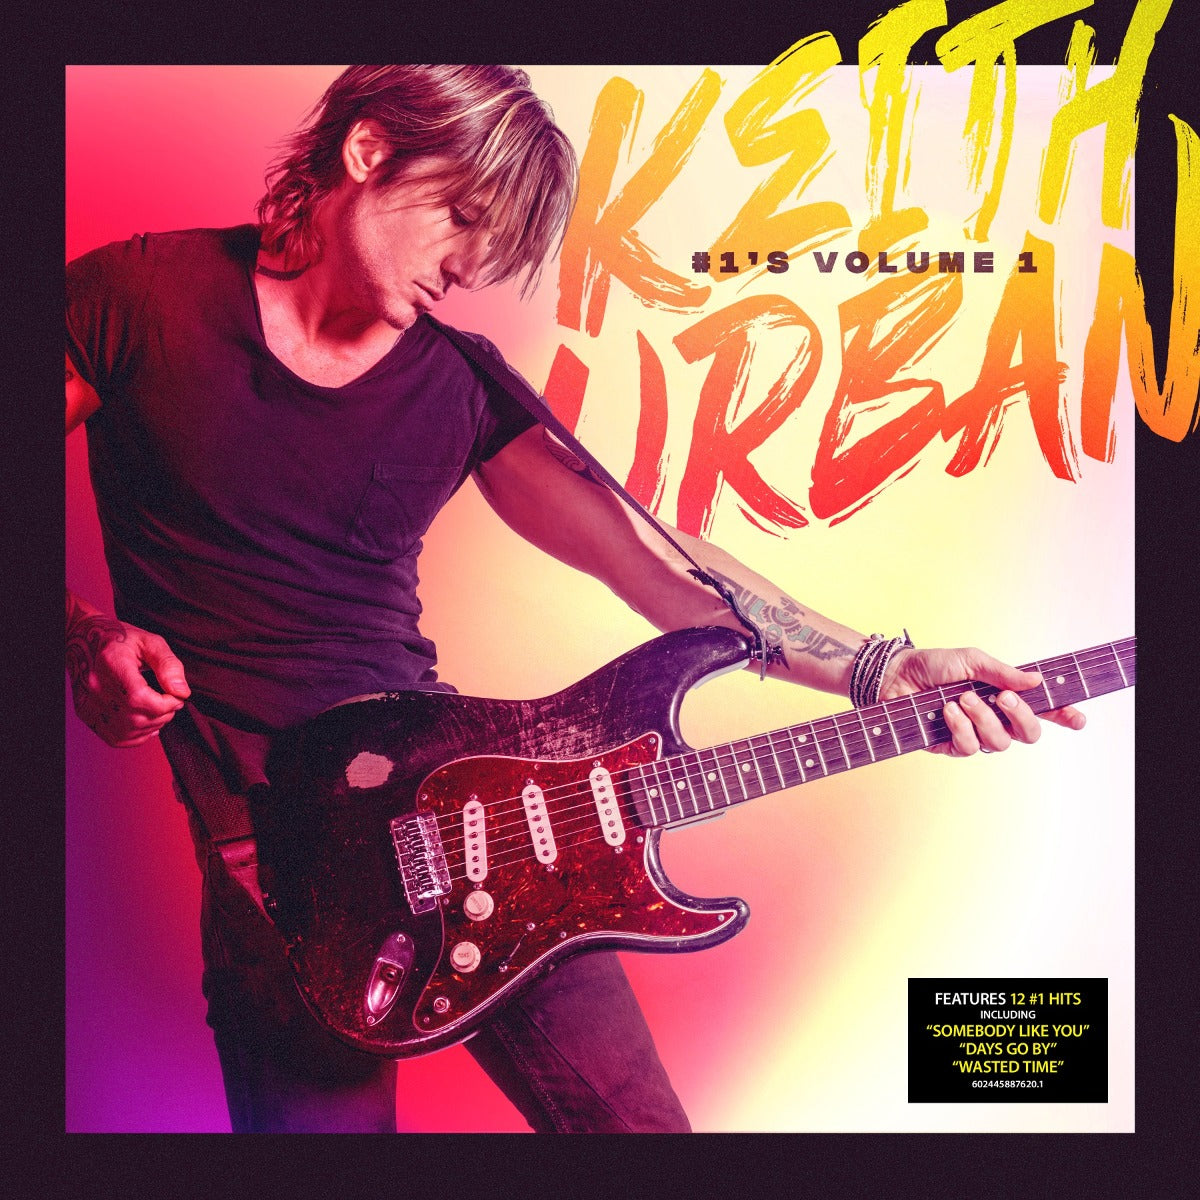 Keith Urban - Keith Urban - #1's Volume 1 (Limited Edition, Coke Bottle Green, Clear Vinyl, Poster) - Joco Records